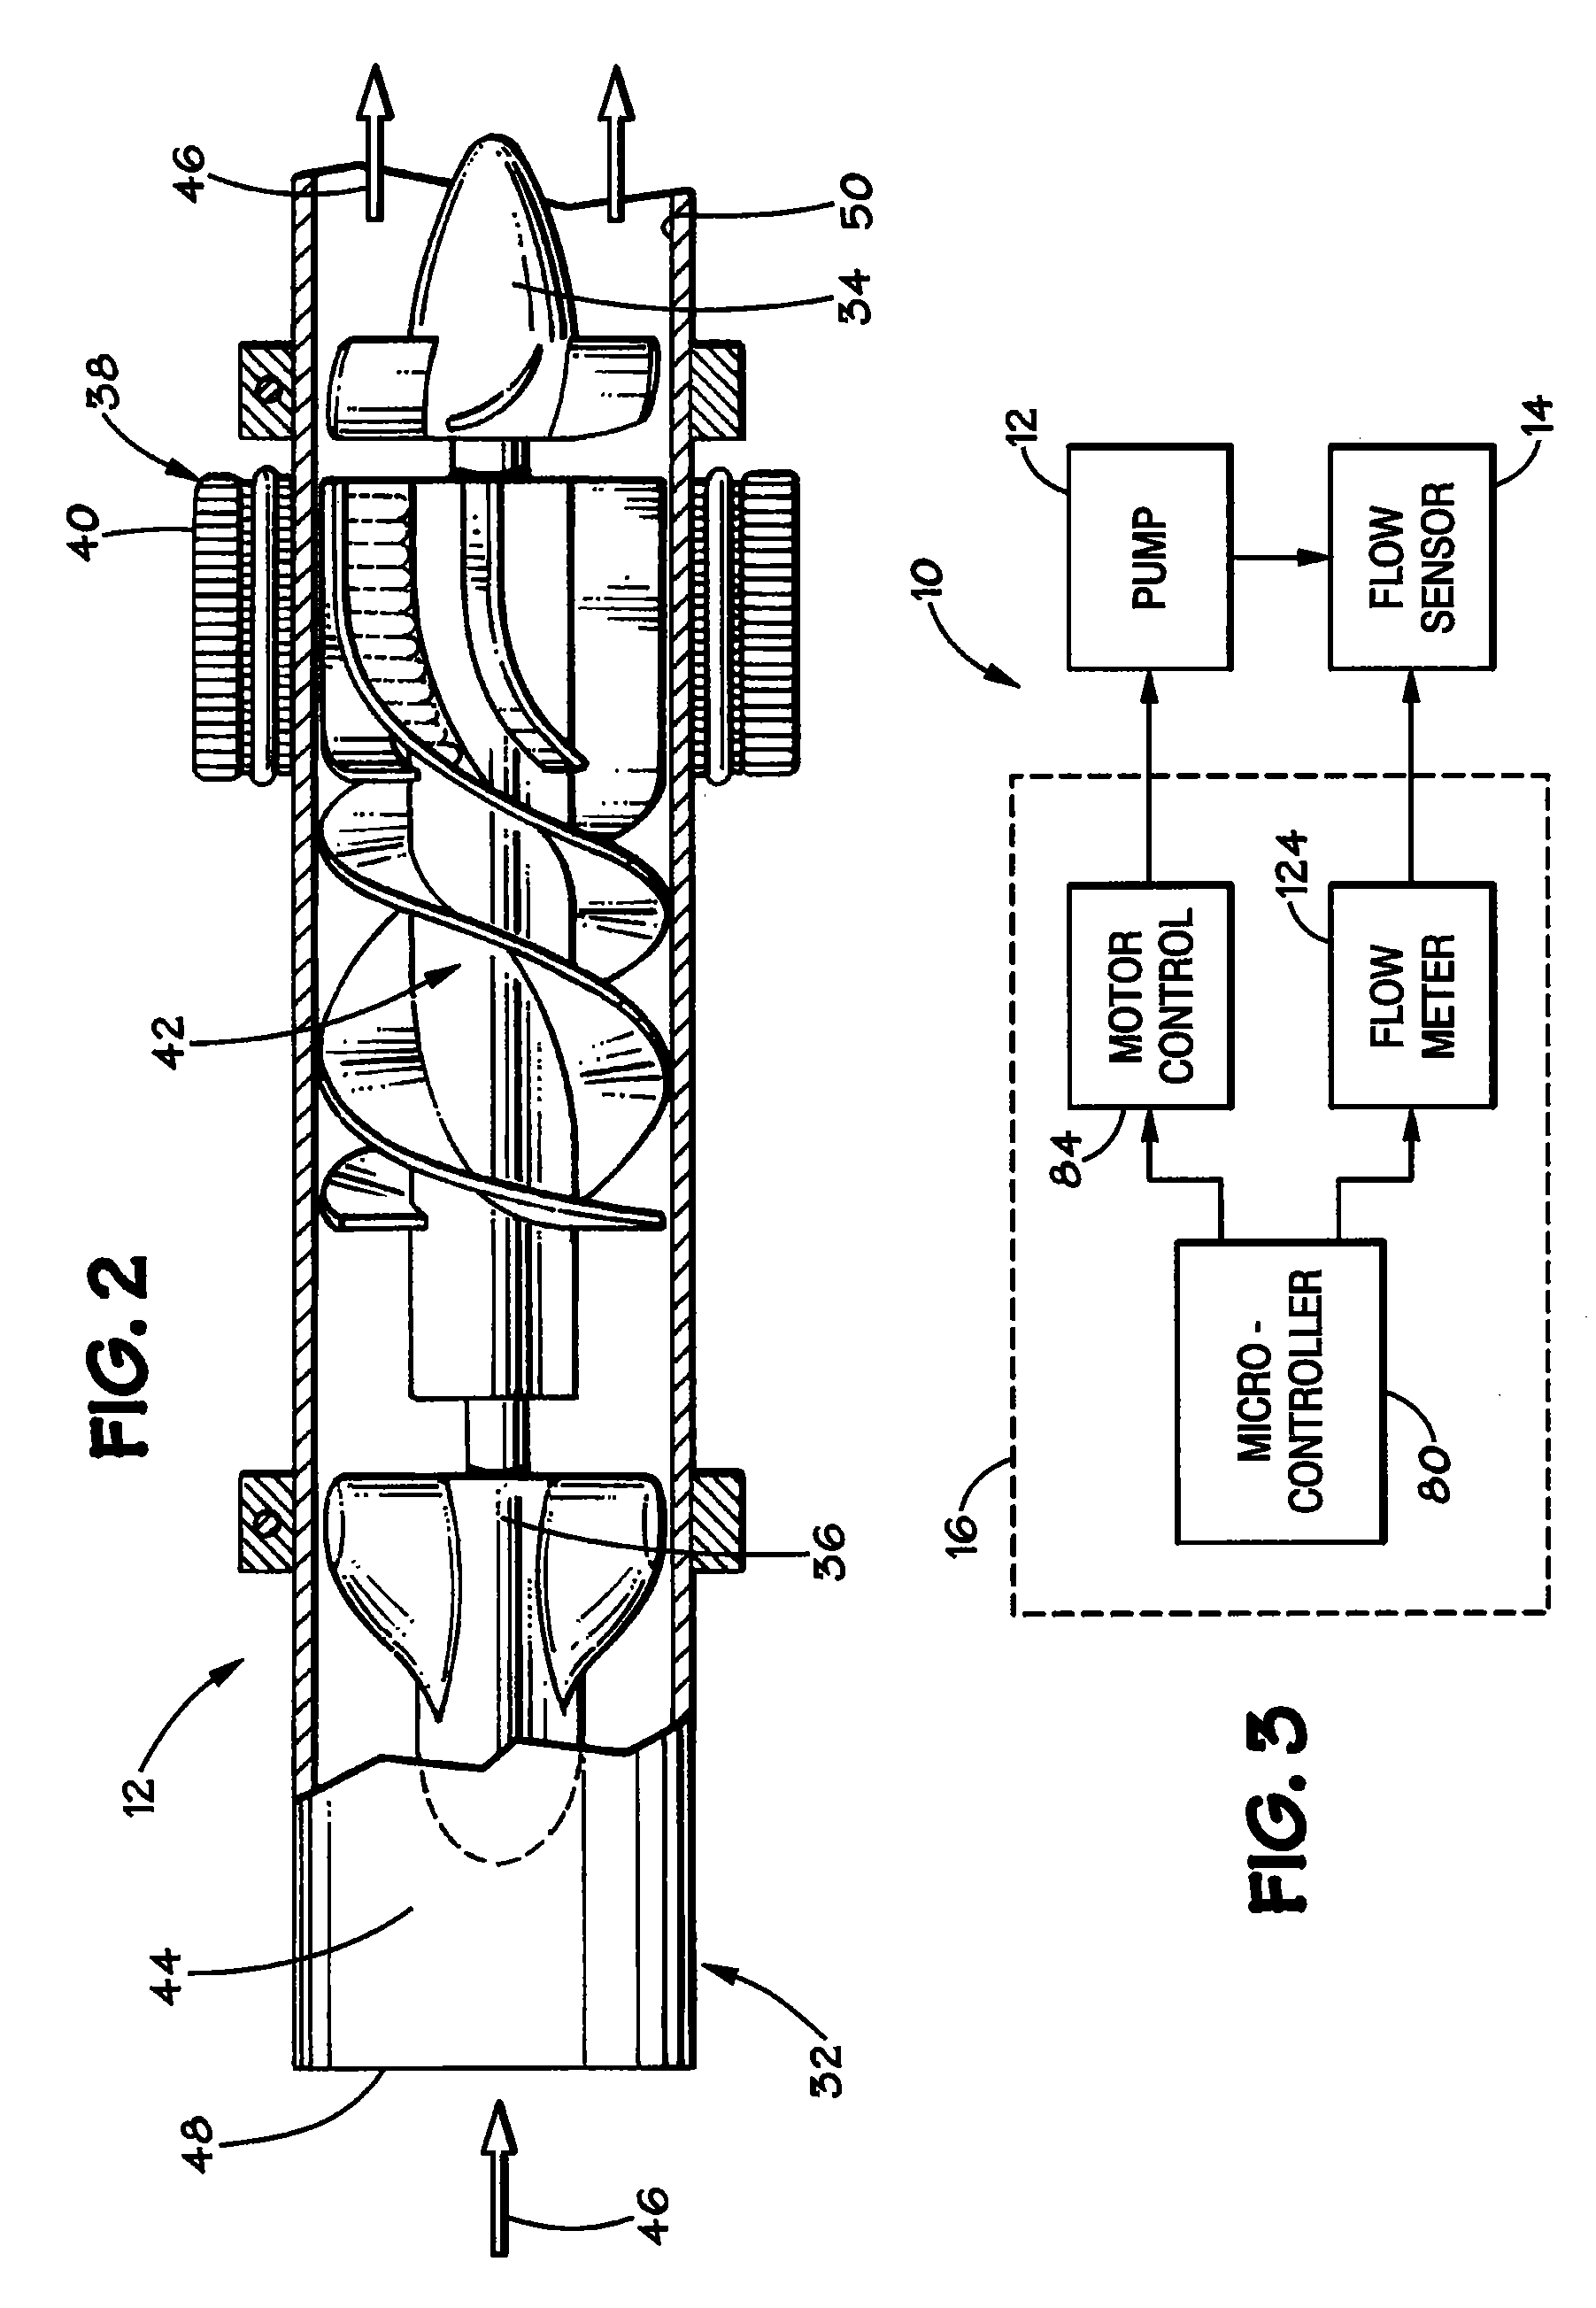 Method and system for detecting ventricular collapse